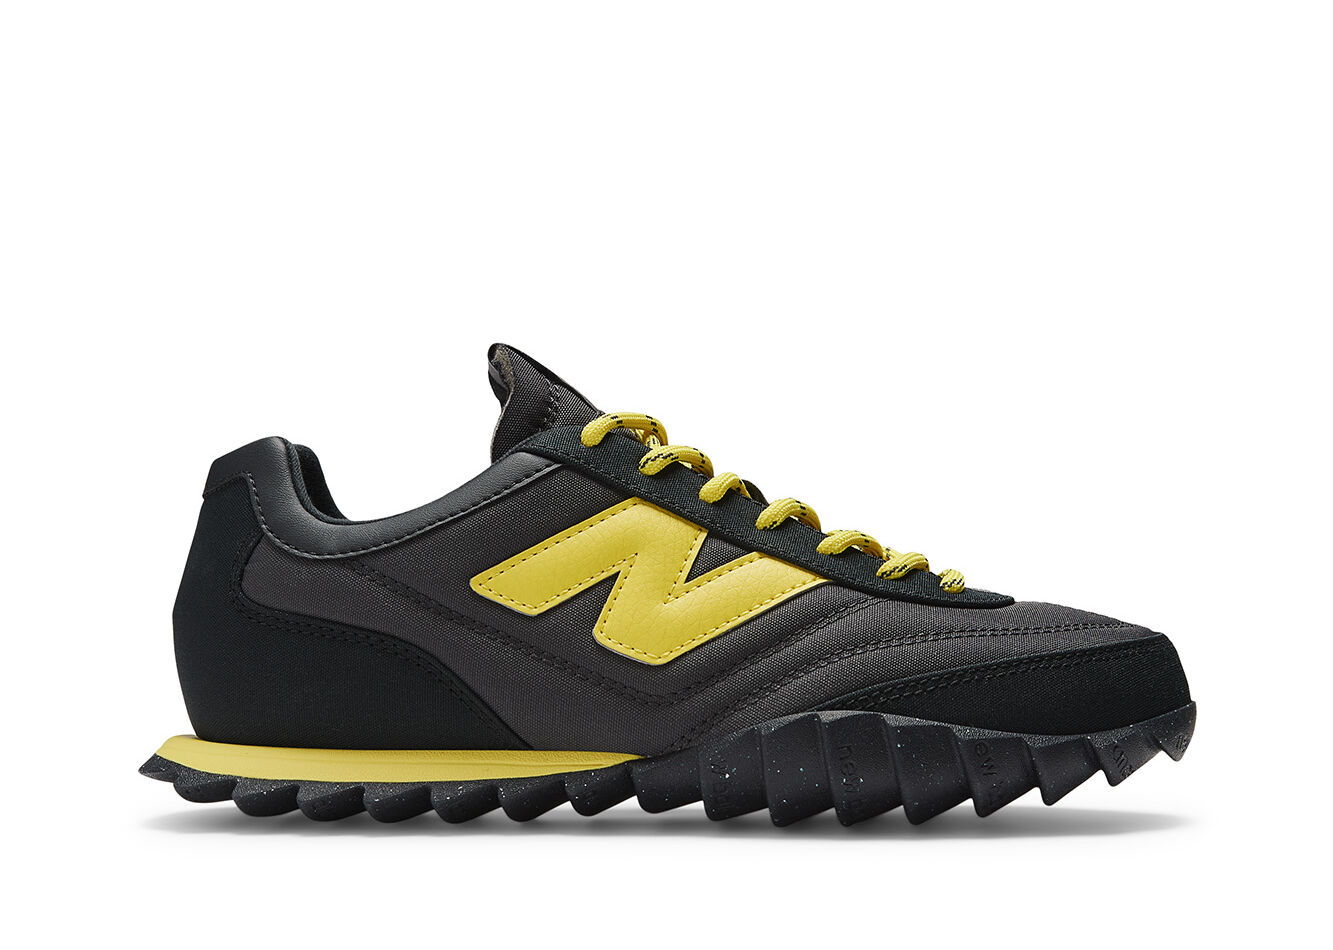 GANNI x New Balance RC30 Sneaker, Recycled Polyester, in colour Black - 1 - GANNI